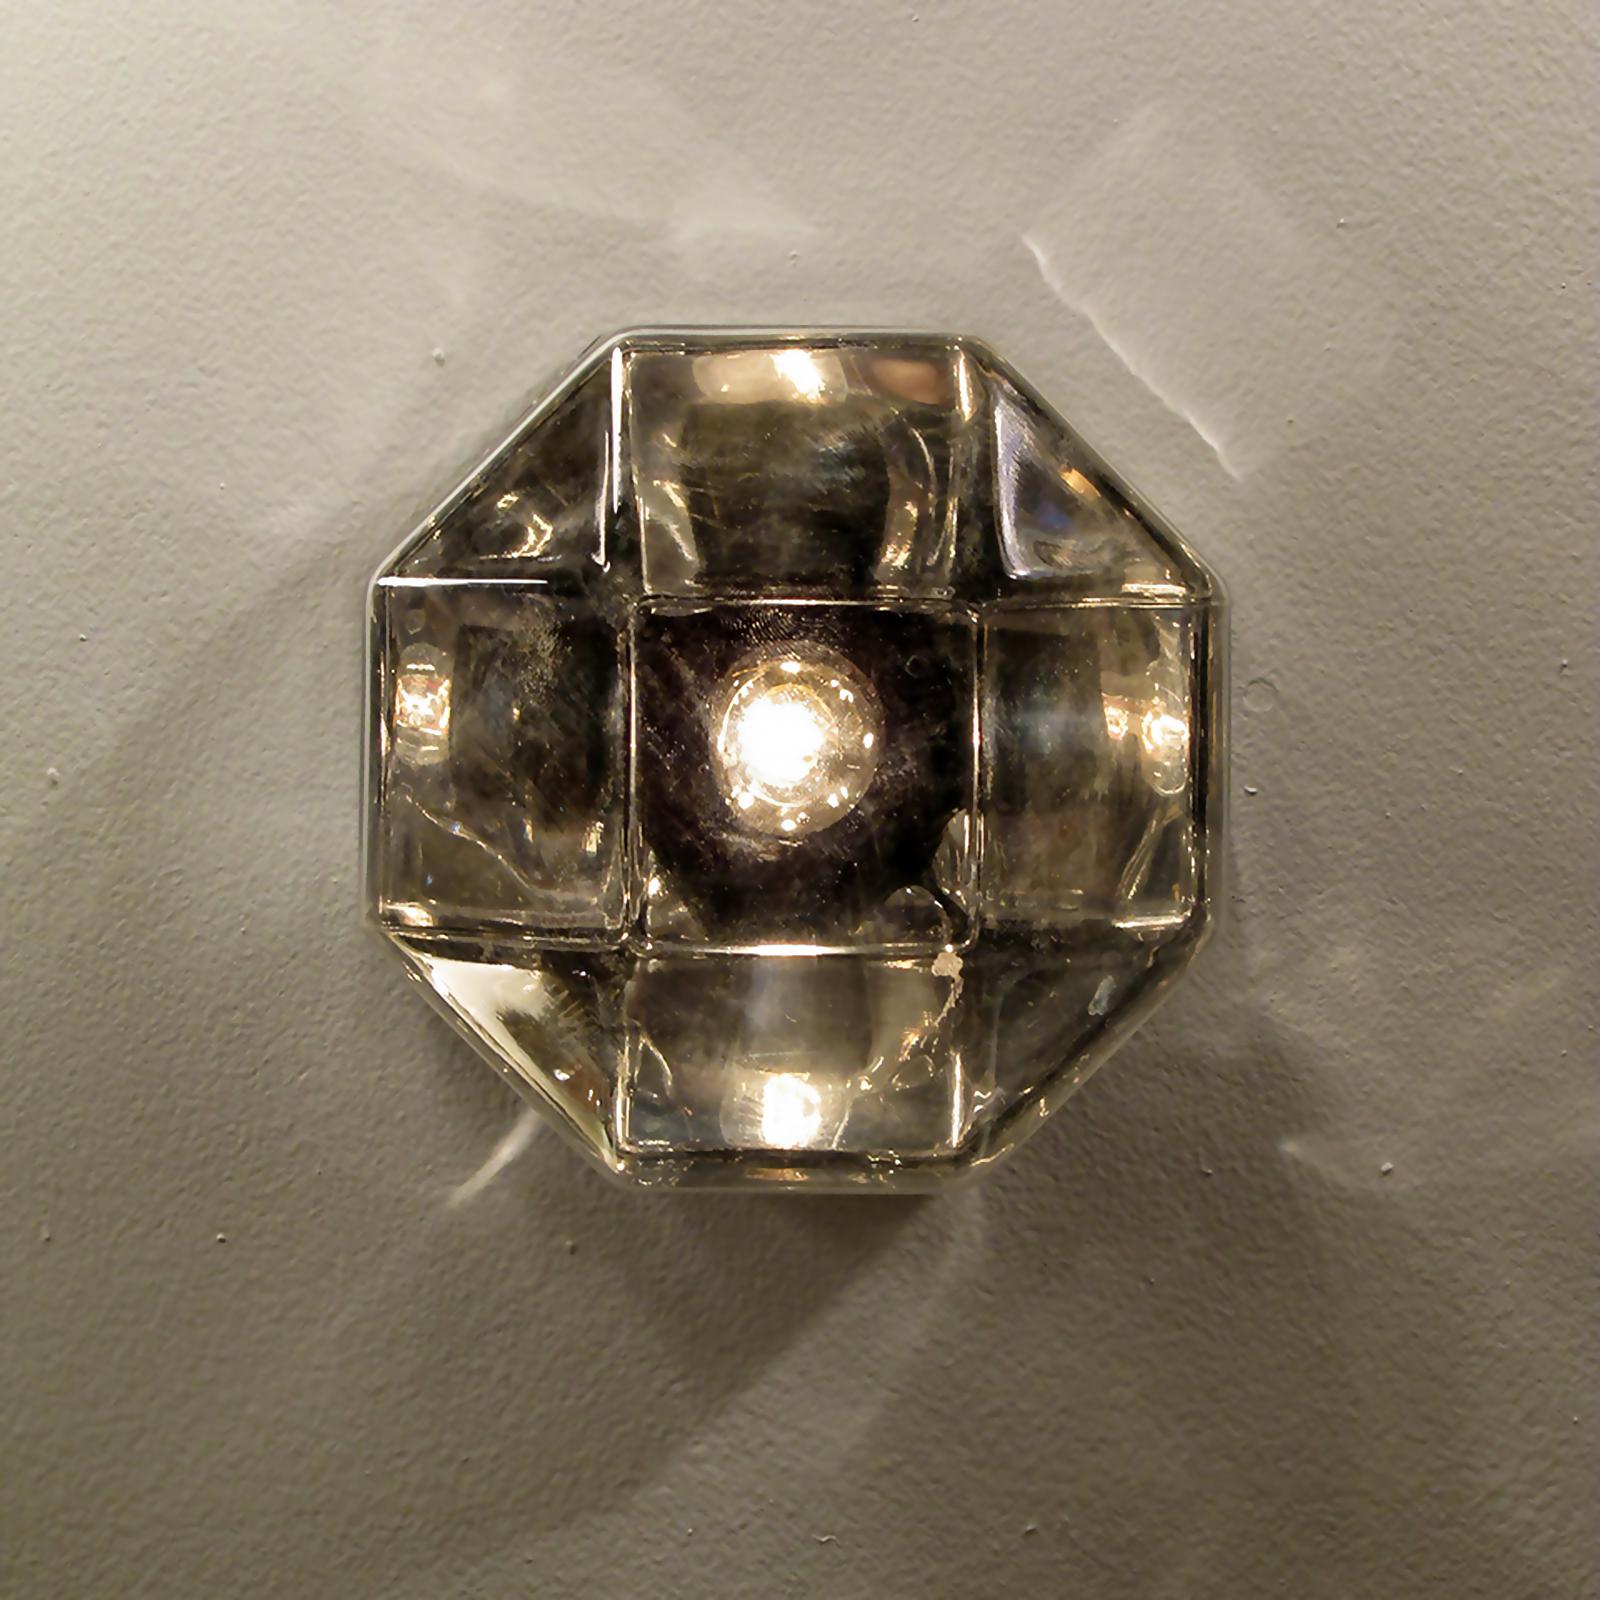 Modular Staff Wall or Ceiling Lights by Motoko Ishii, 1970 In Good Condition For Sale In Los Angeles, CA